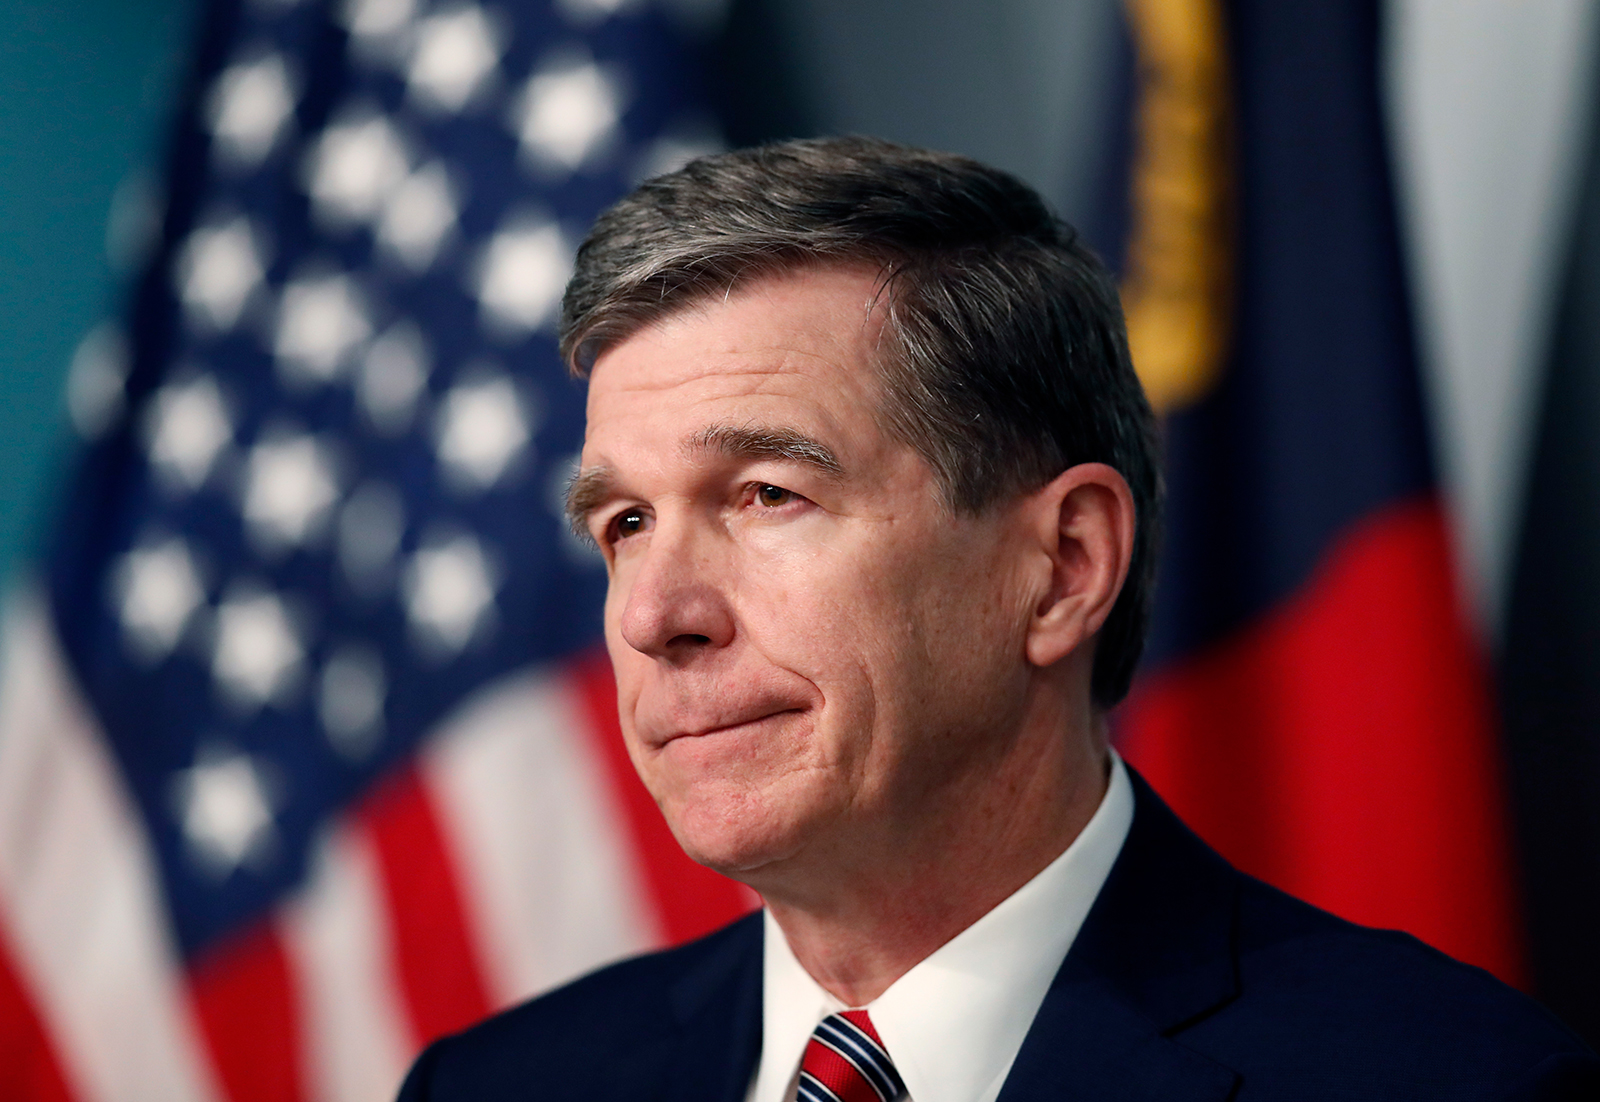 Gov. Roy Cooper listens to a question during a briefing on the coronavirus pandemic at the Emergency Operations Center in Raleigh, North Carolina, on May 26.